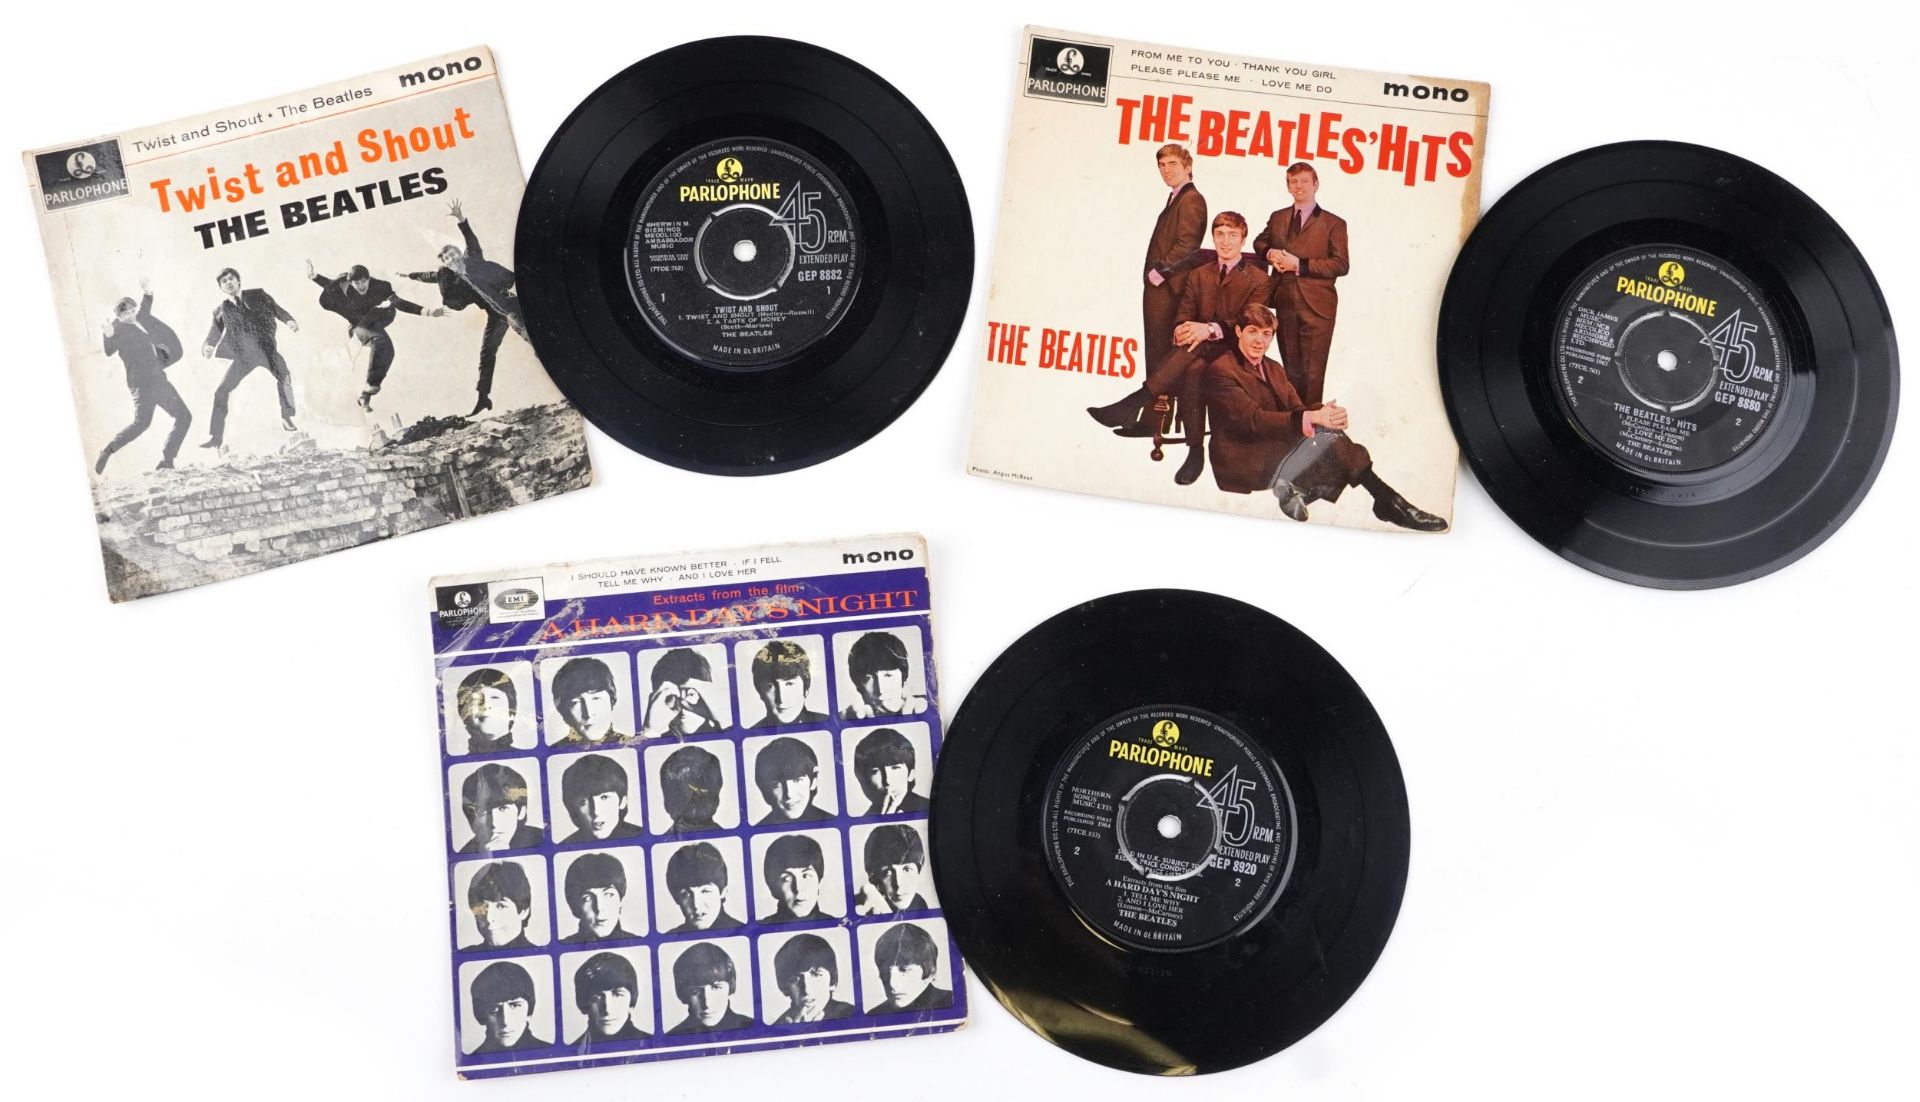 Three The Beatles 45rpm records comprising A Hard Day's Night, The Beatles Hits and Twist and